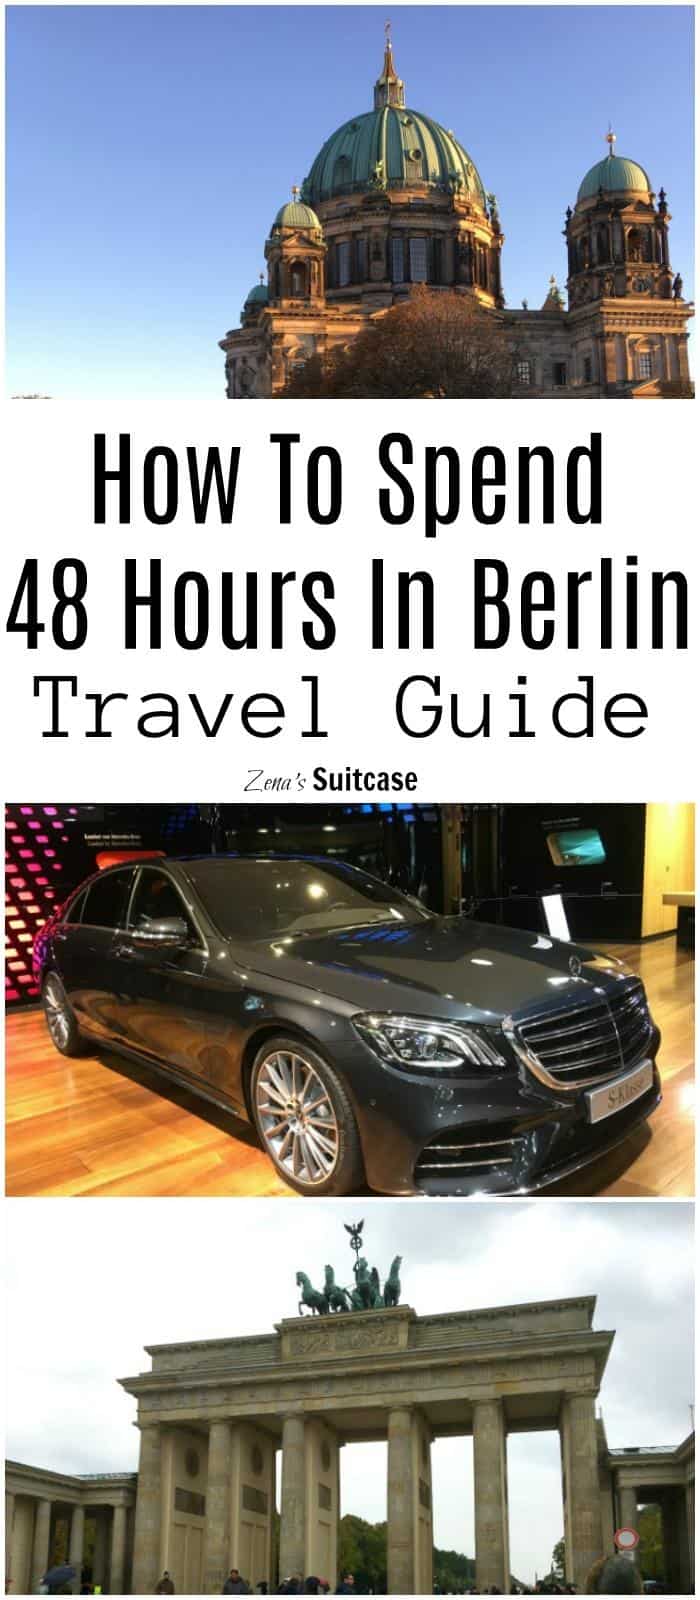 48 Hour travel guide for Berlin - A perfect itinerary for spending 2 days in Germany’s capital for visiting the must see sights and includes top travel tips